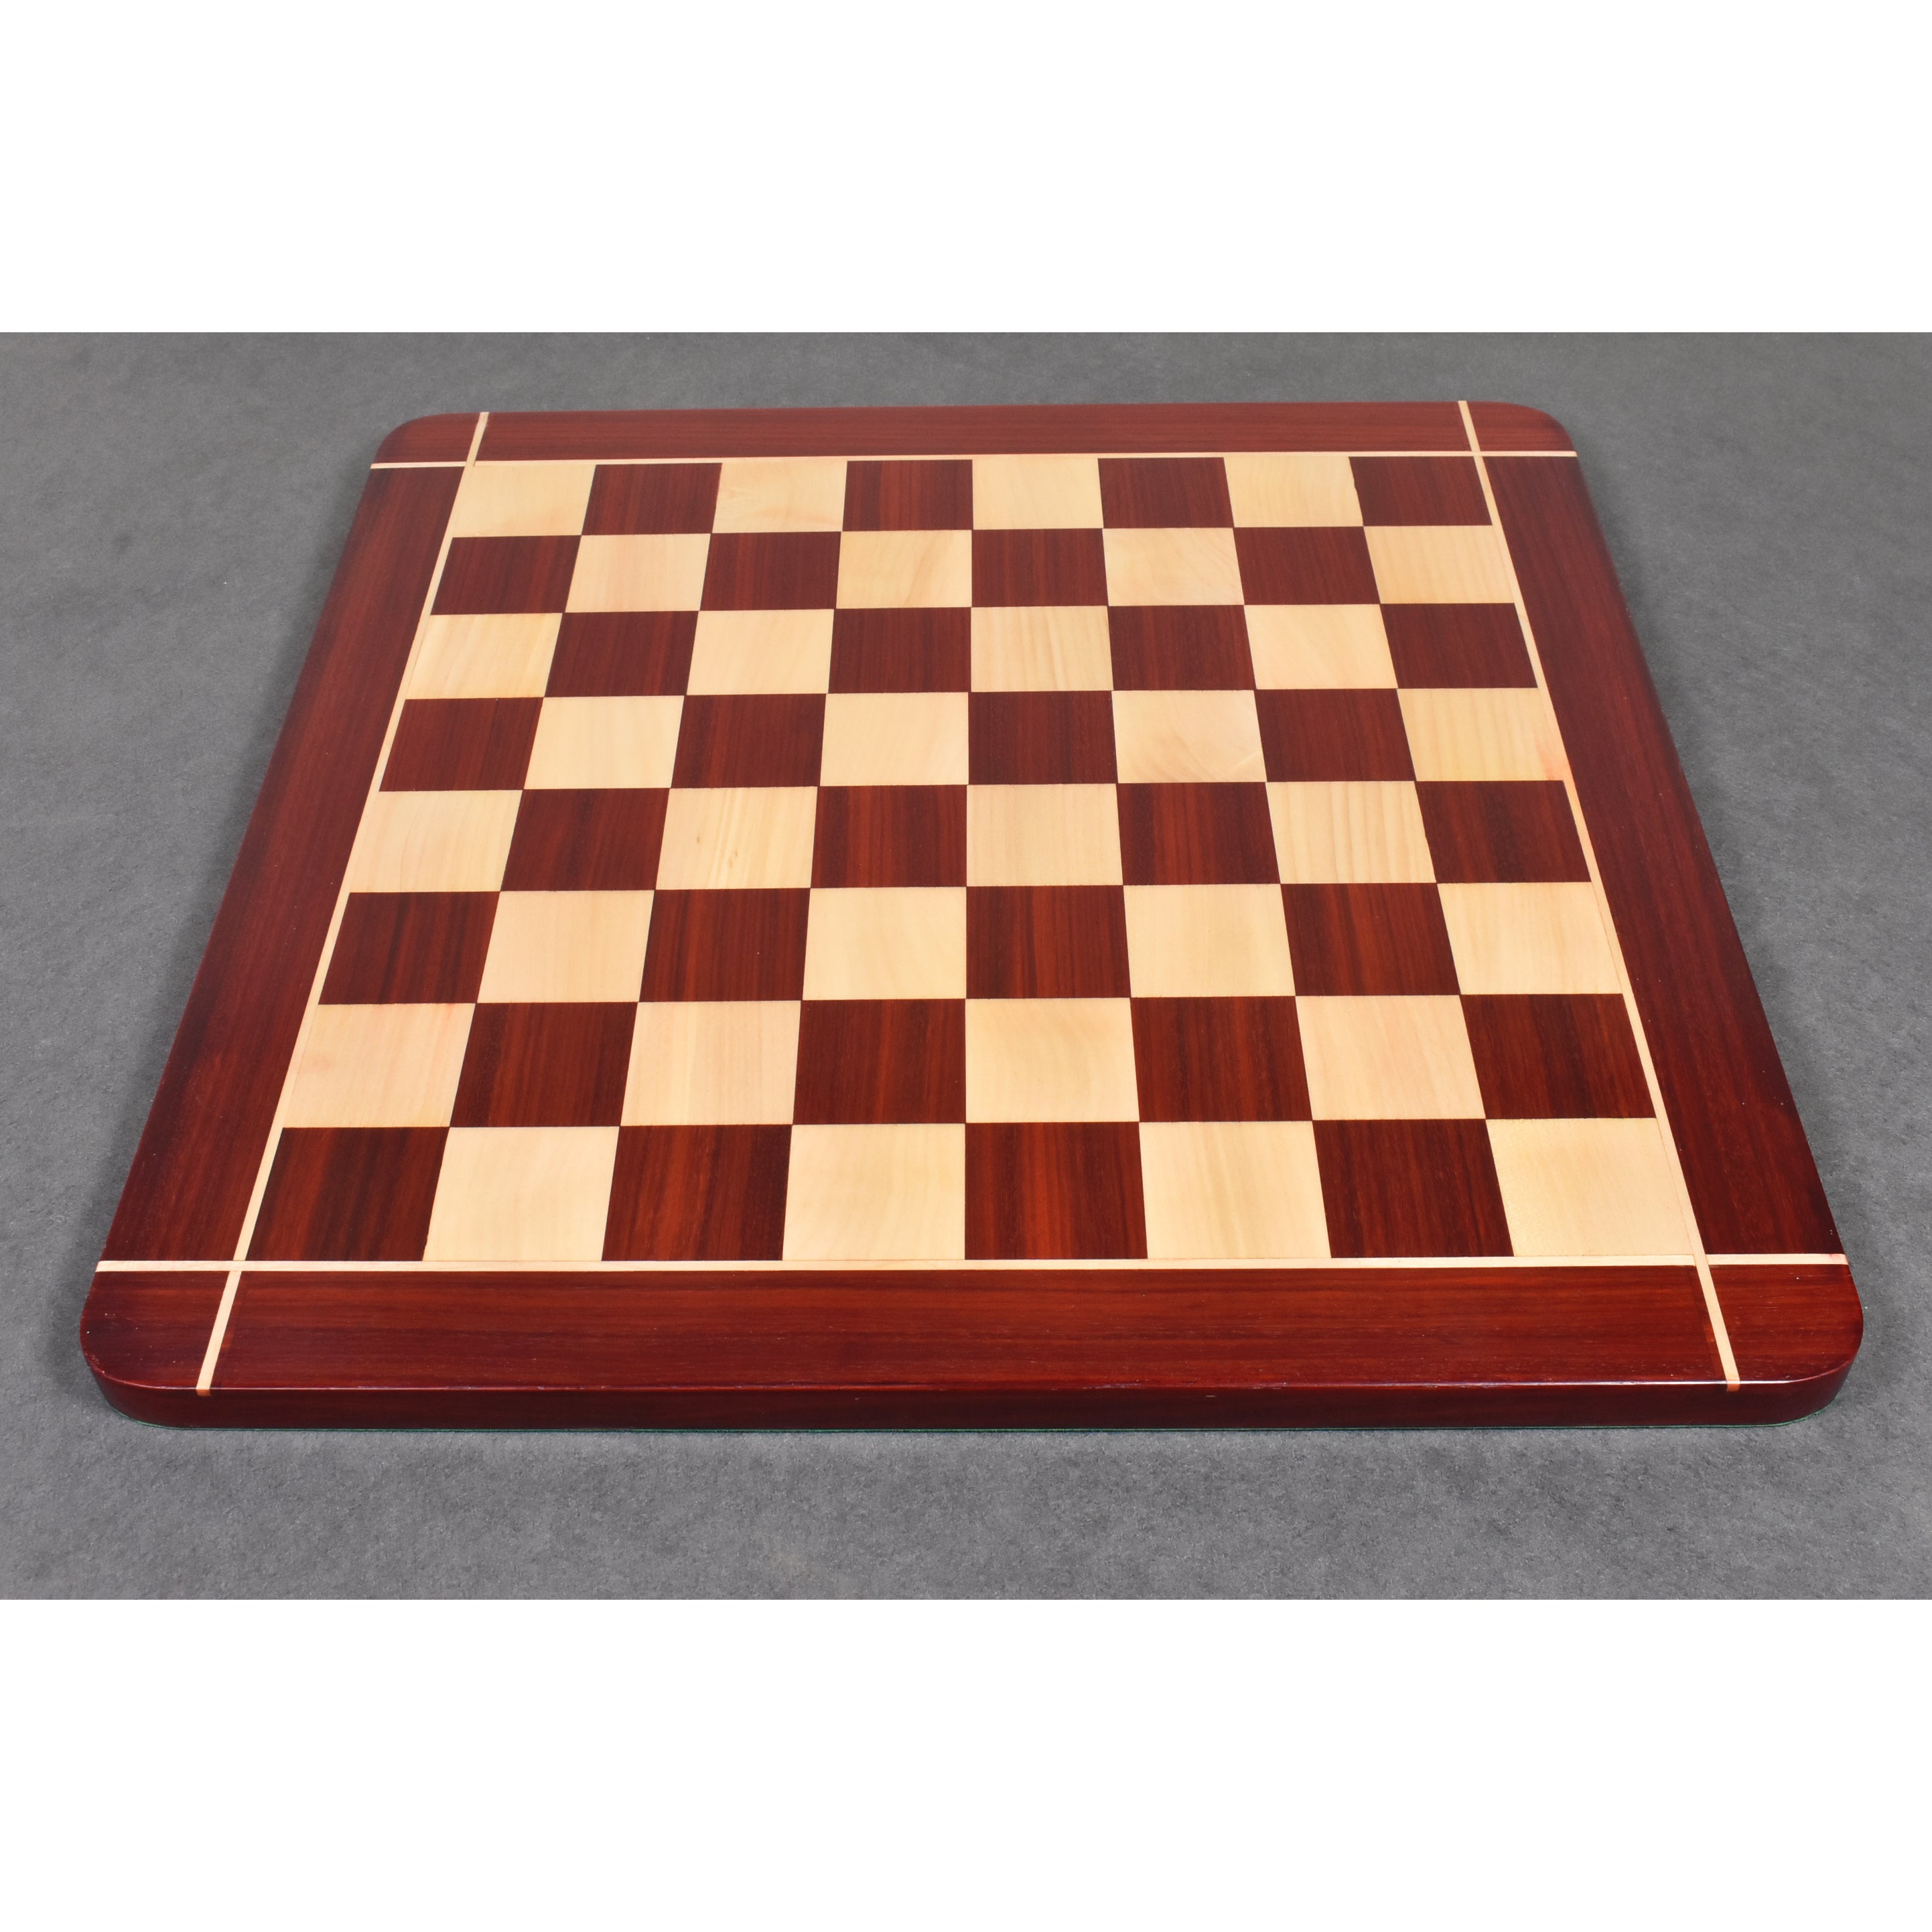 Combo of 4.5" Sheffield Staunton Luxury Chess Set - Pieces in Bud Rosewood with Chessboard and Storage Box